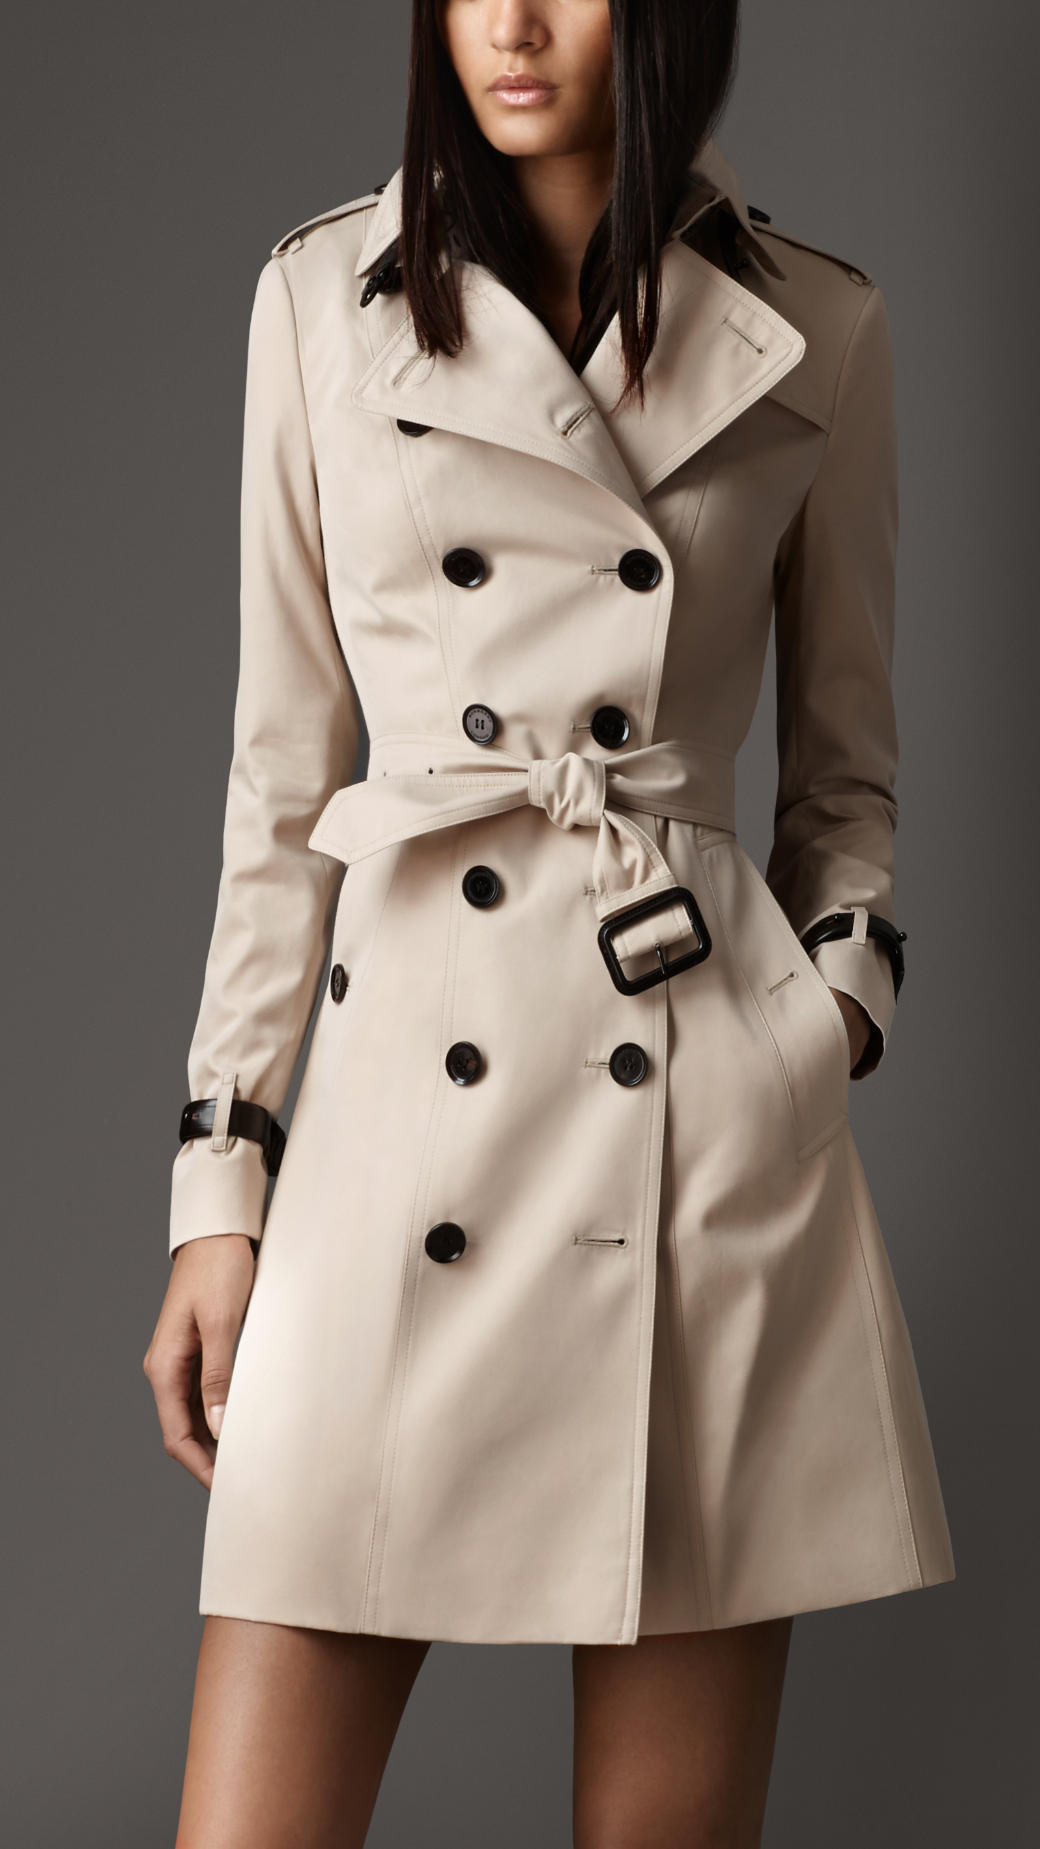 Burberry Long Leather Detail Gabardine Trench Coat in Natural | Lyst